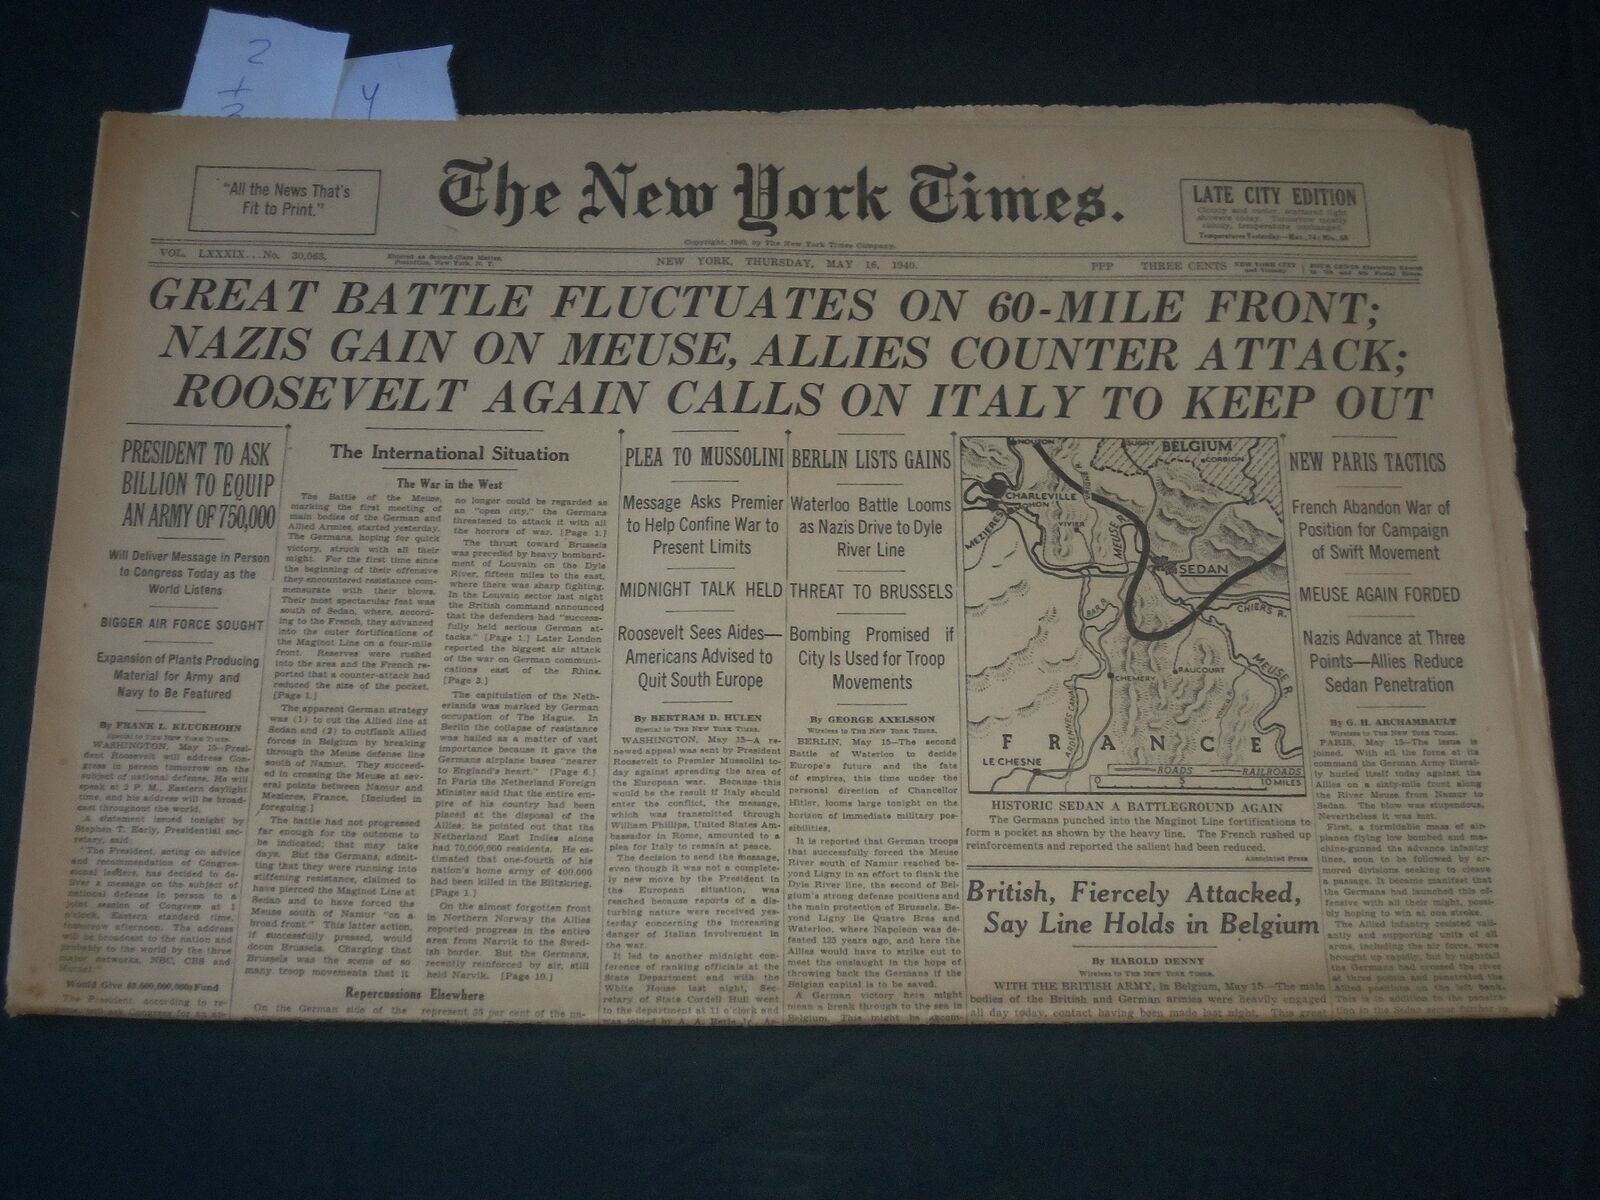 1940 MAY 16 NEW YORK TIMES - GREAT BATTLE FLUCTUATES ON 60 MILE FRONT - NP 3609